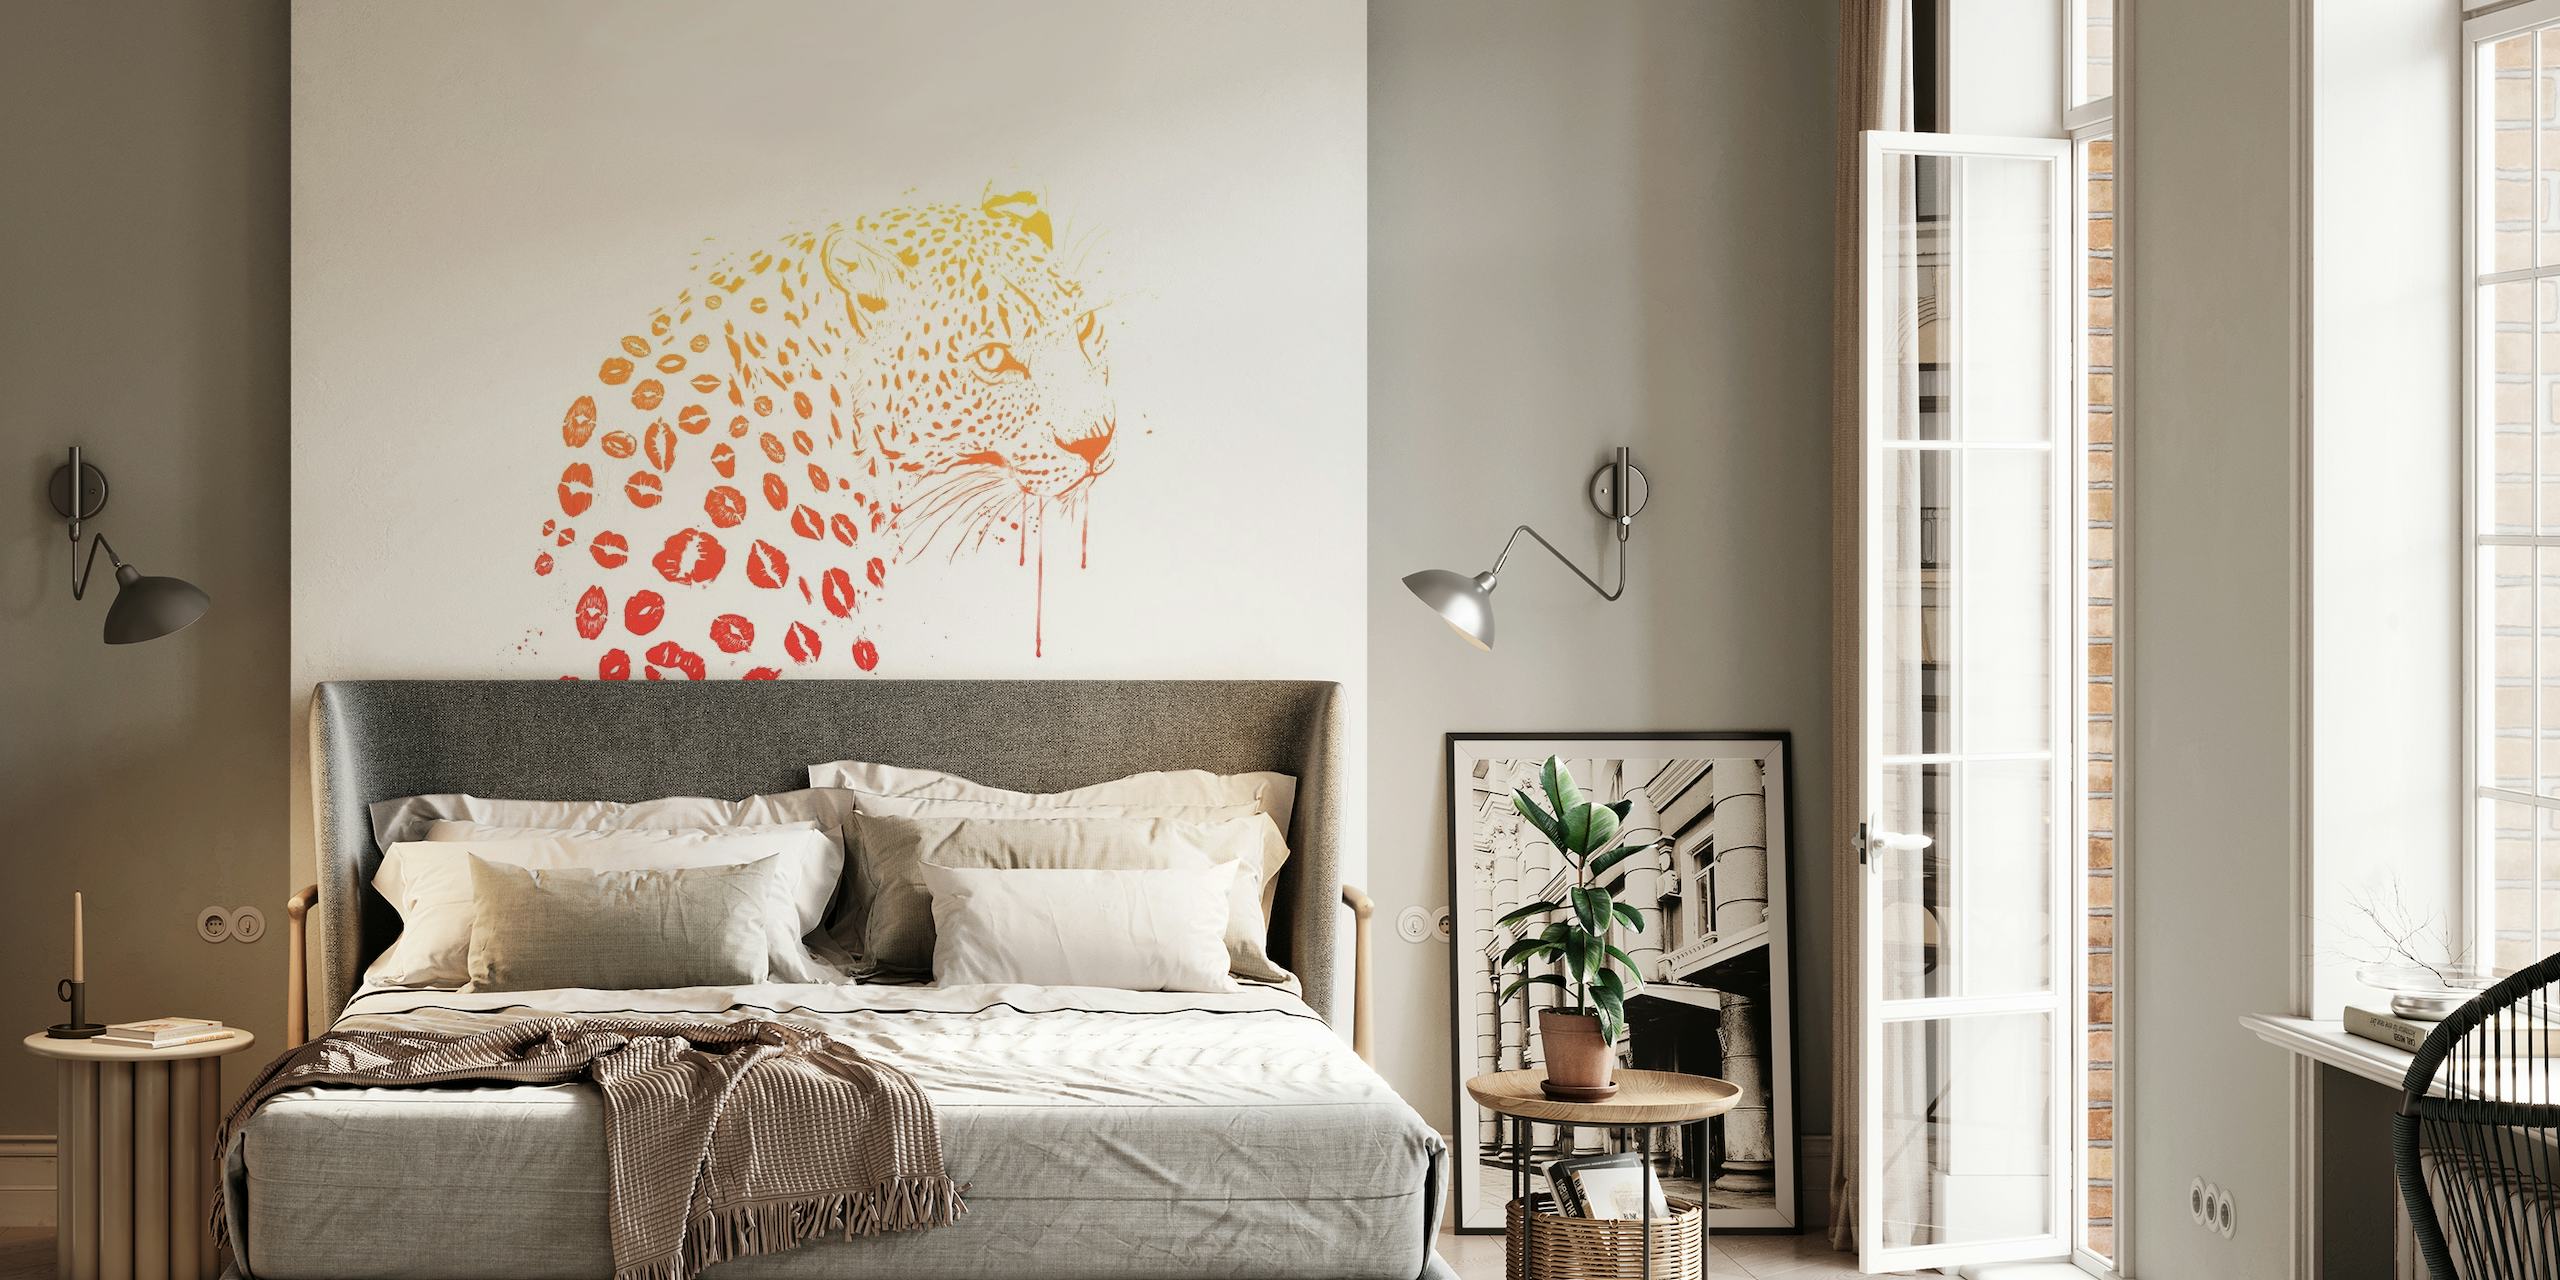 Leopard wall mural with red kiss marks